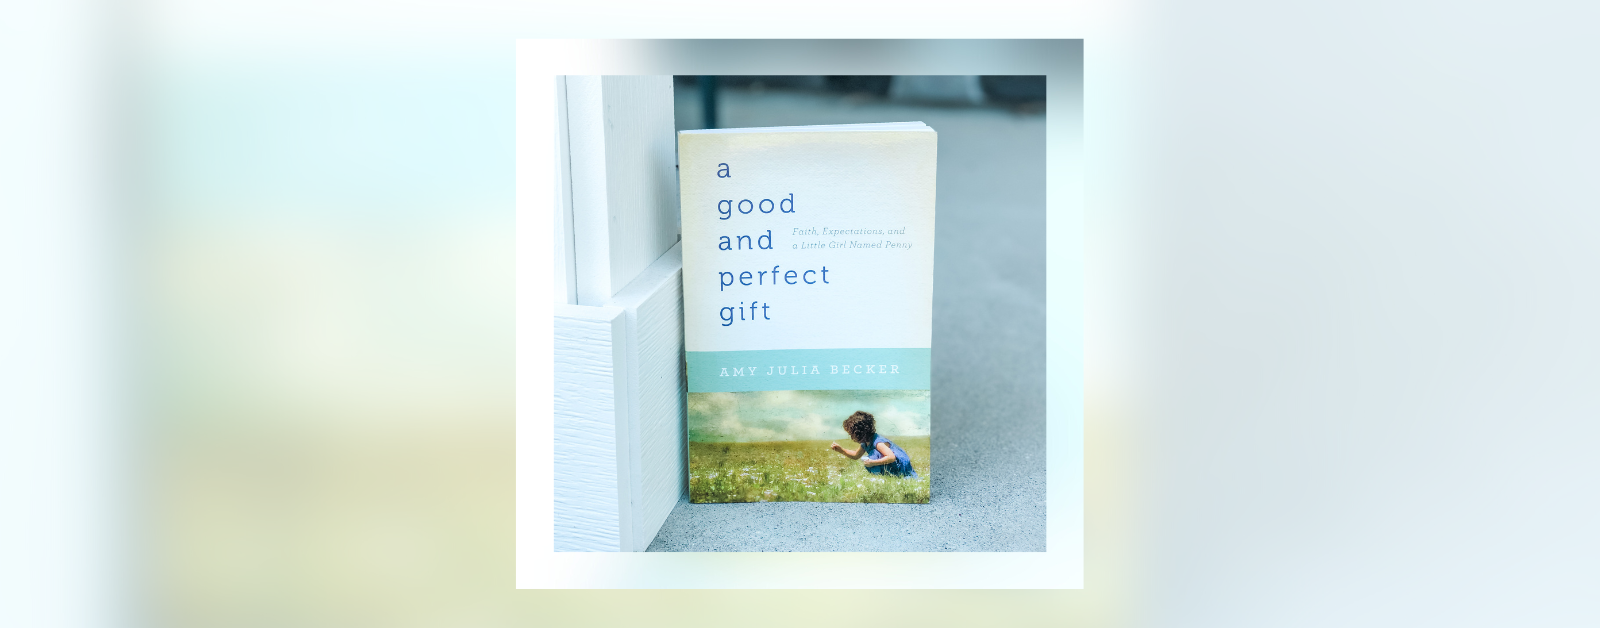 photo of a good and perfect gift book on a porch